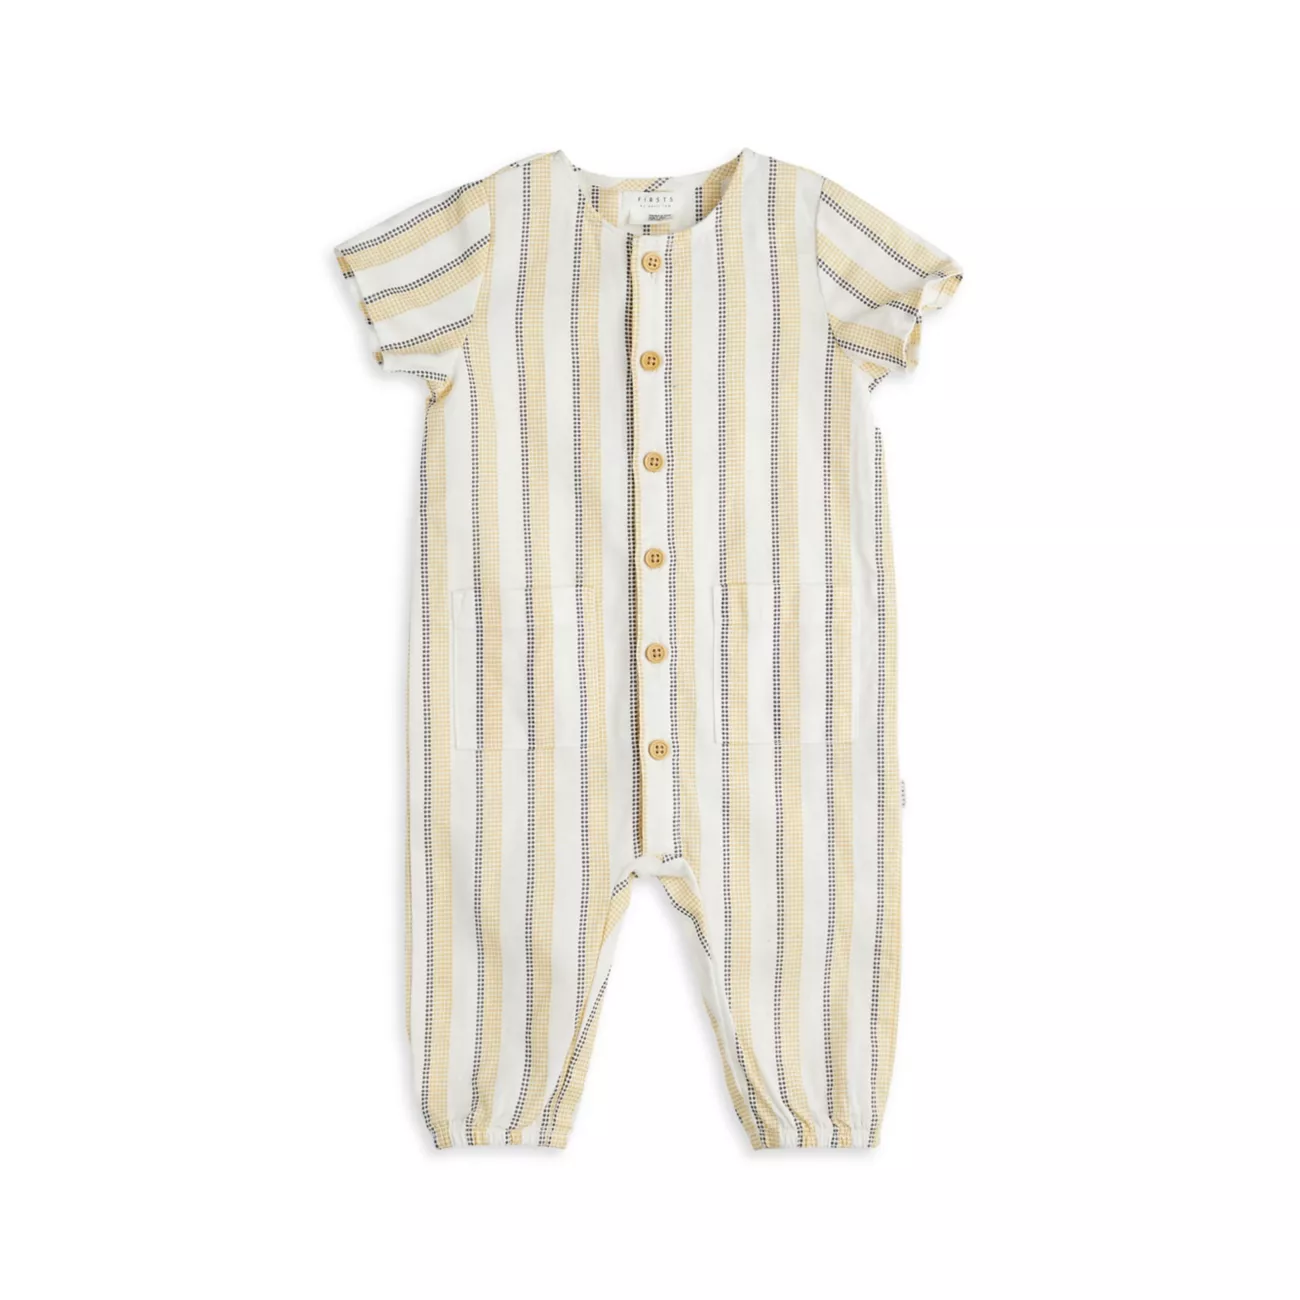 Baby's Striped Dot Striped Coveralls Firsts by Petit Lem